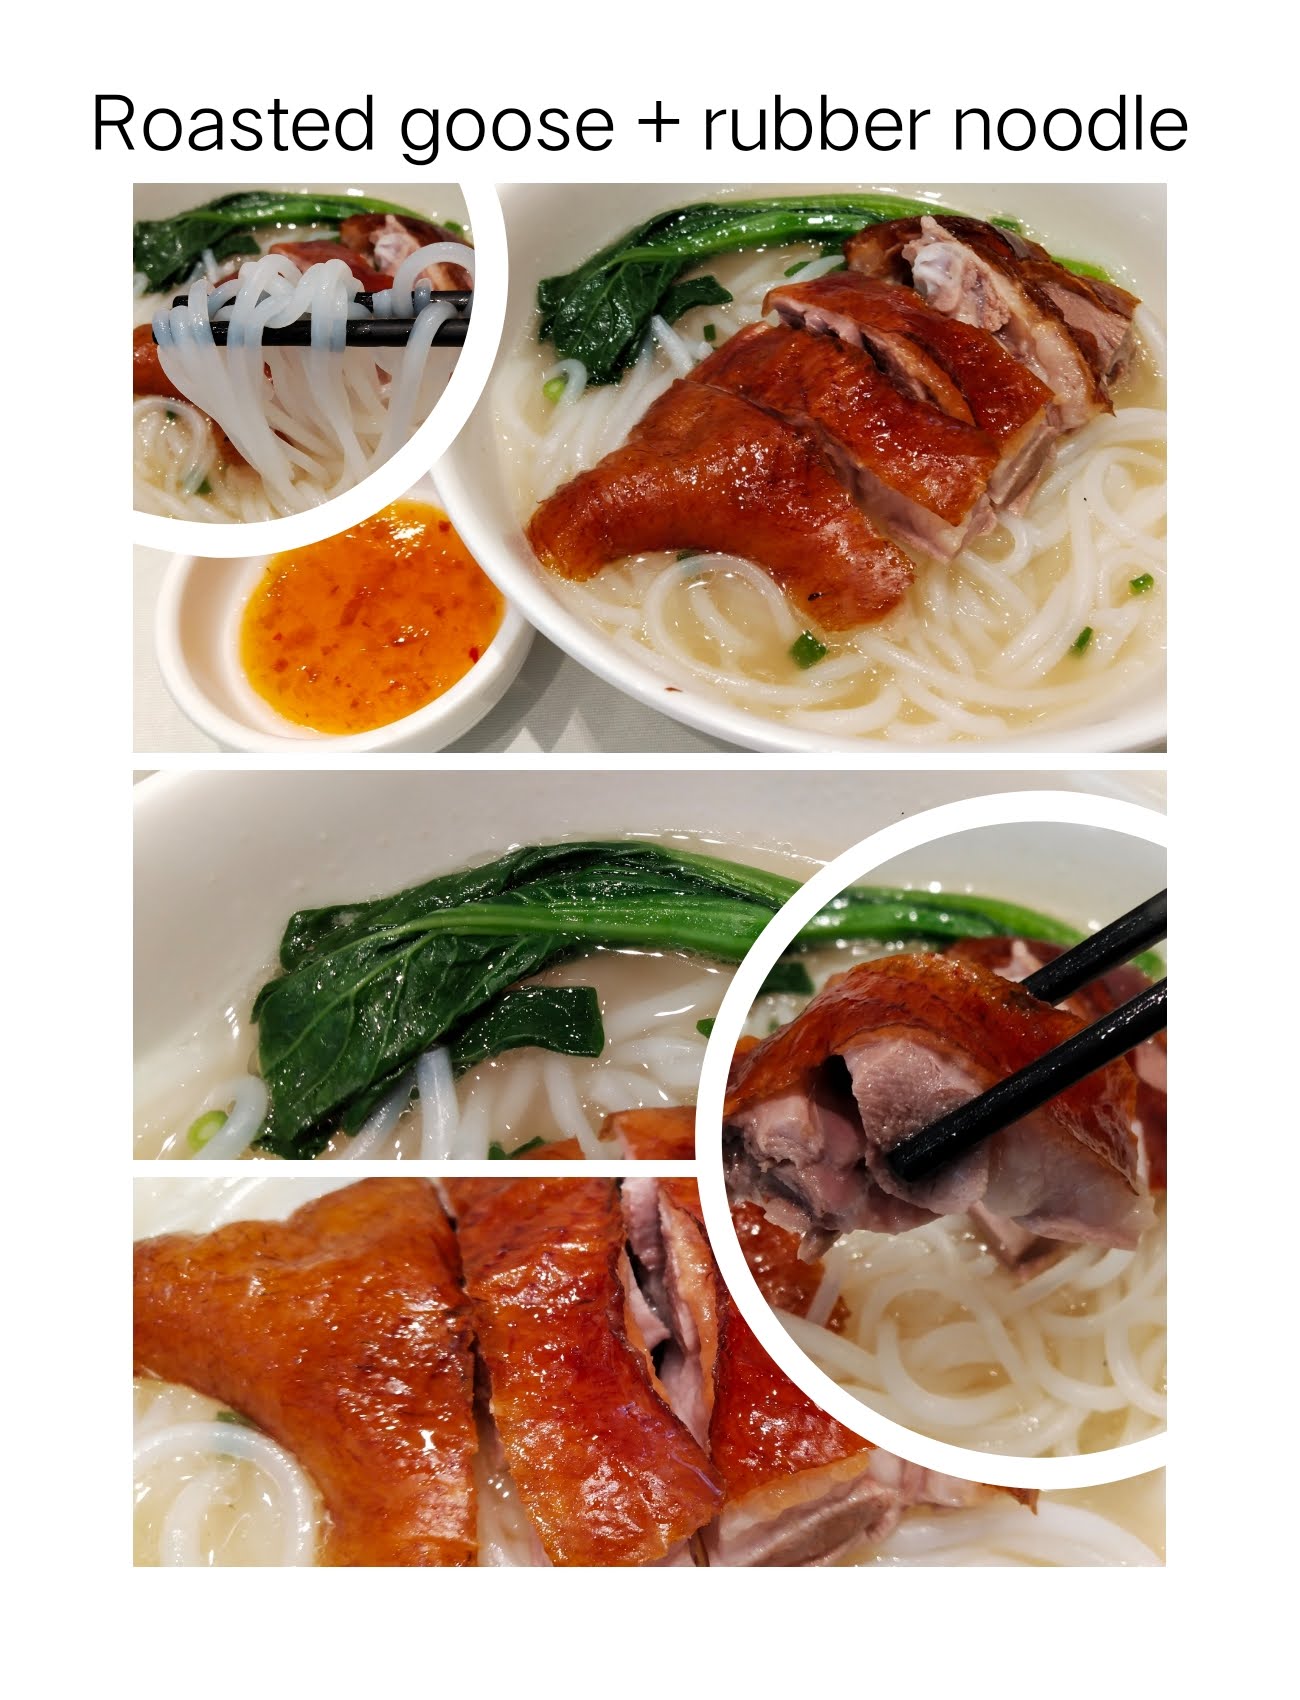 Share Frank's post about Chinese BBQ noodle for solo travelers